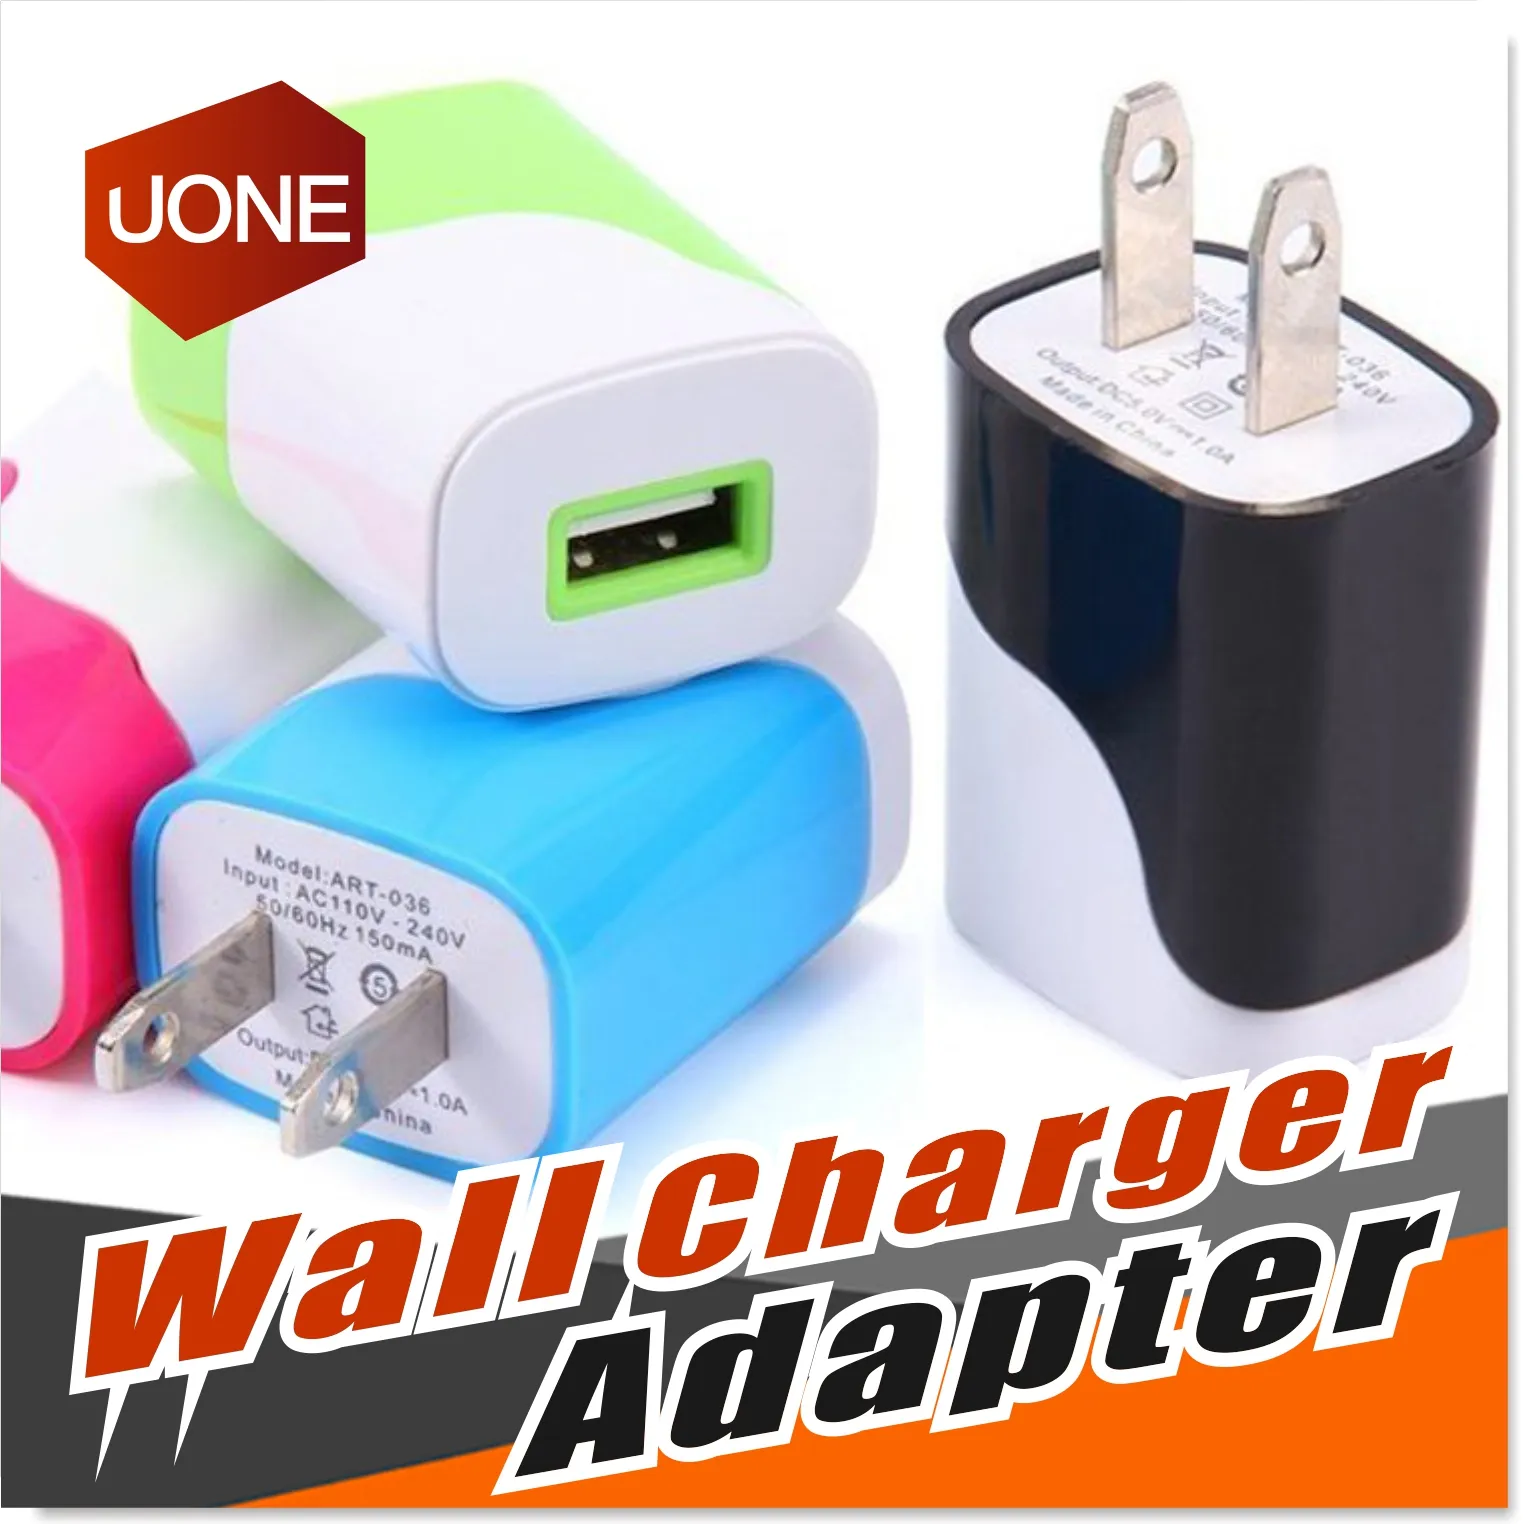 For iPhone 6 6s Plus Usb Wall Charger, 1A 5V Universal USB Home Travel Power Adapter Plug Wall Charger for Samsung HTC LG MOTO ZTE etc